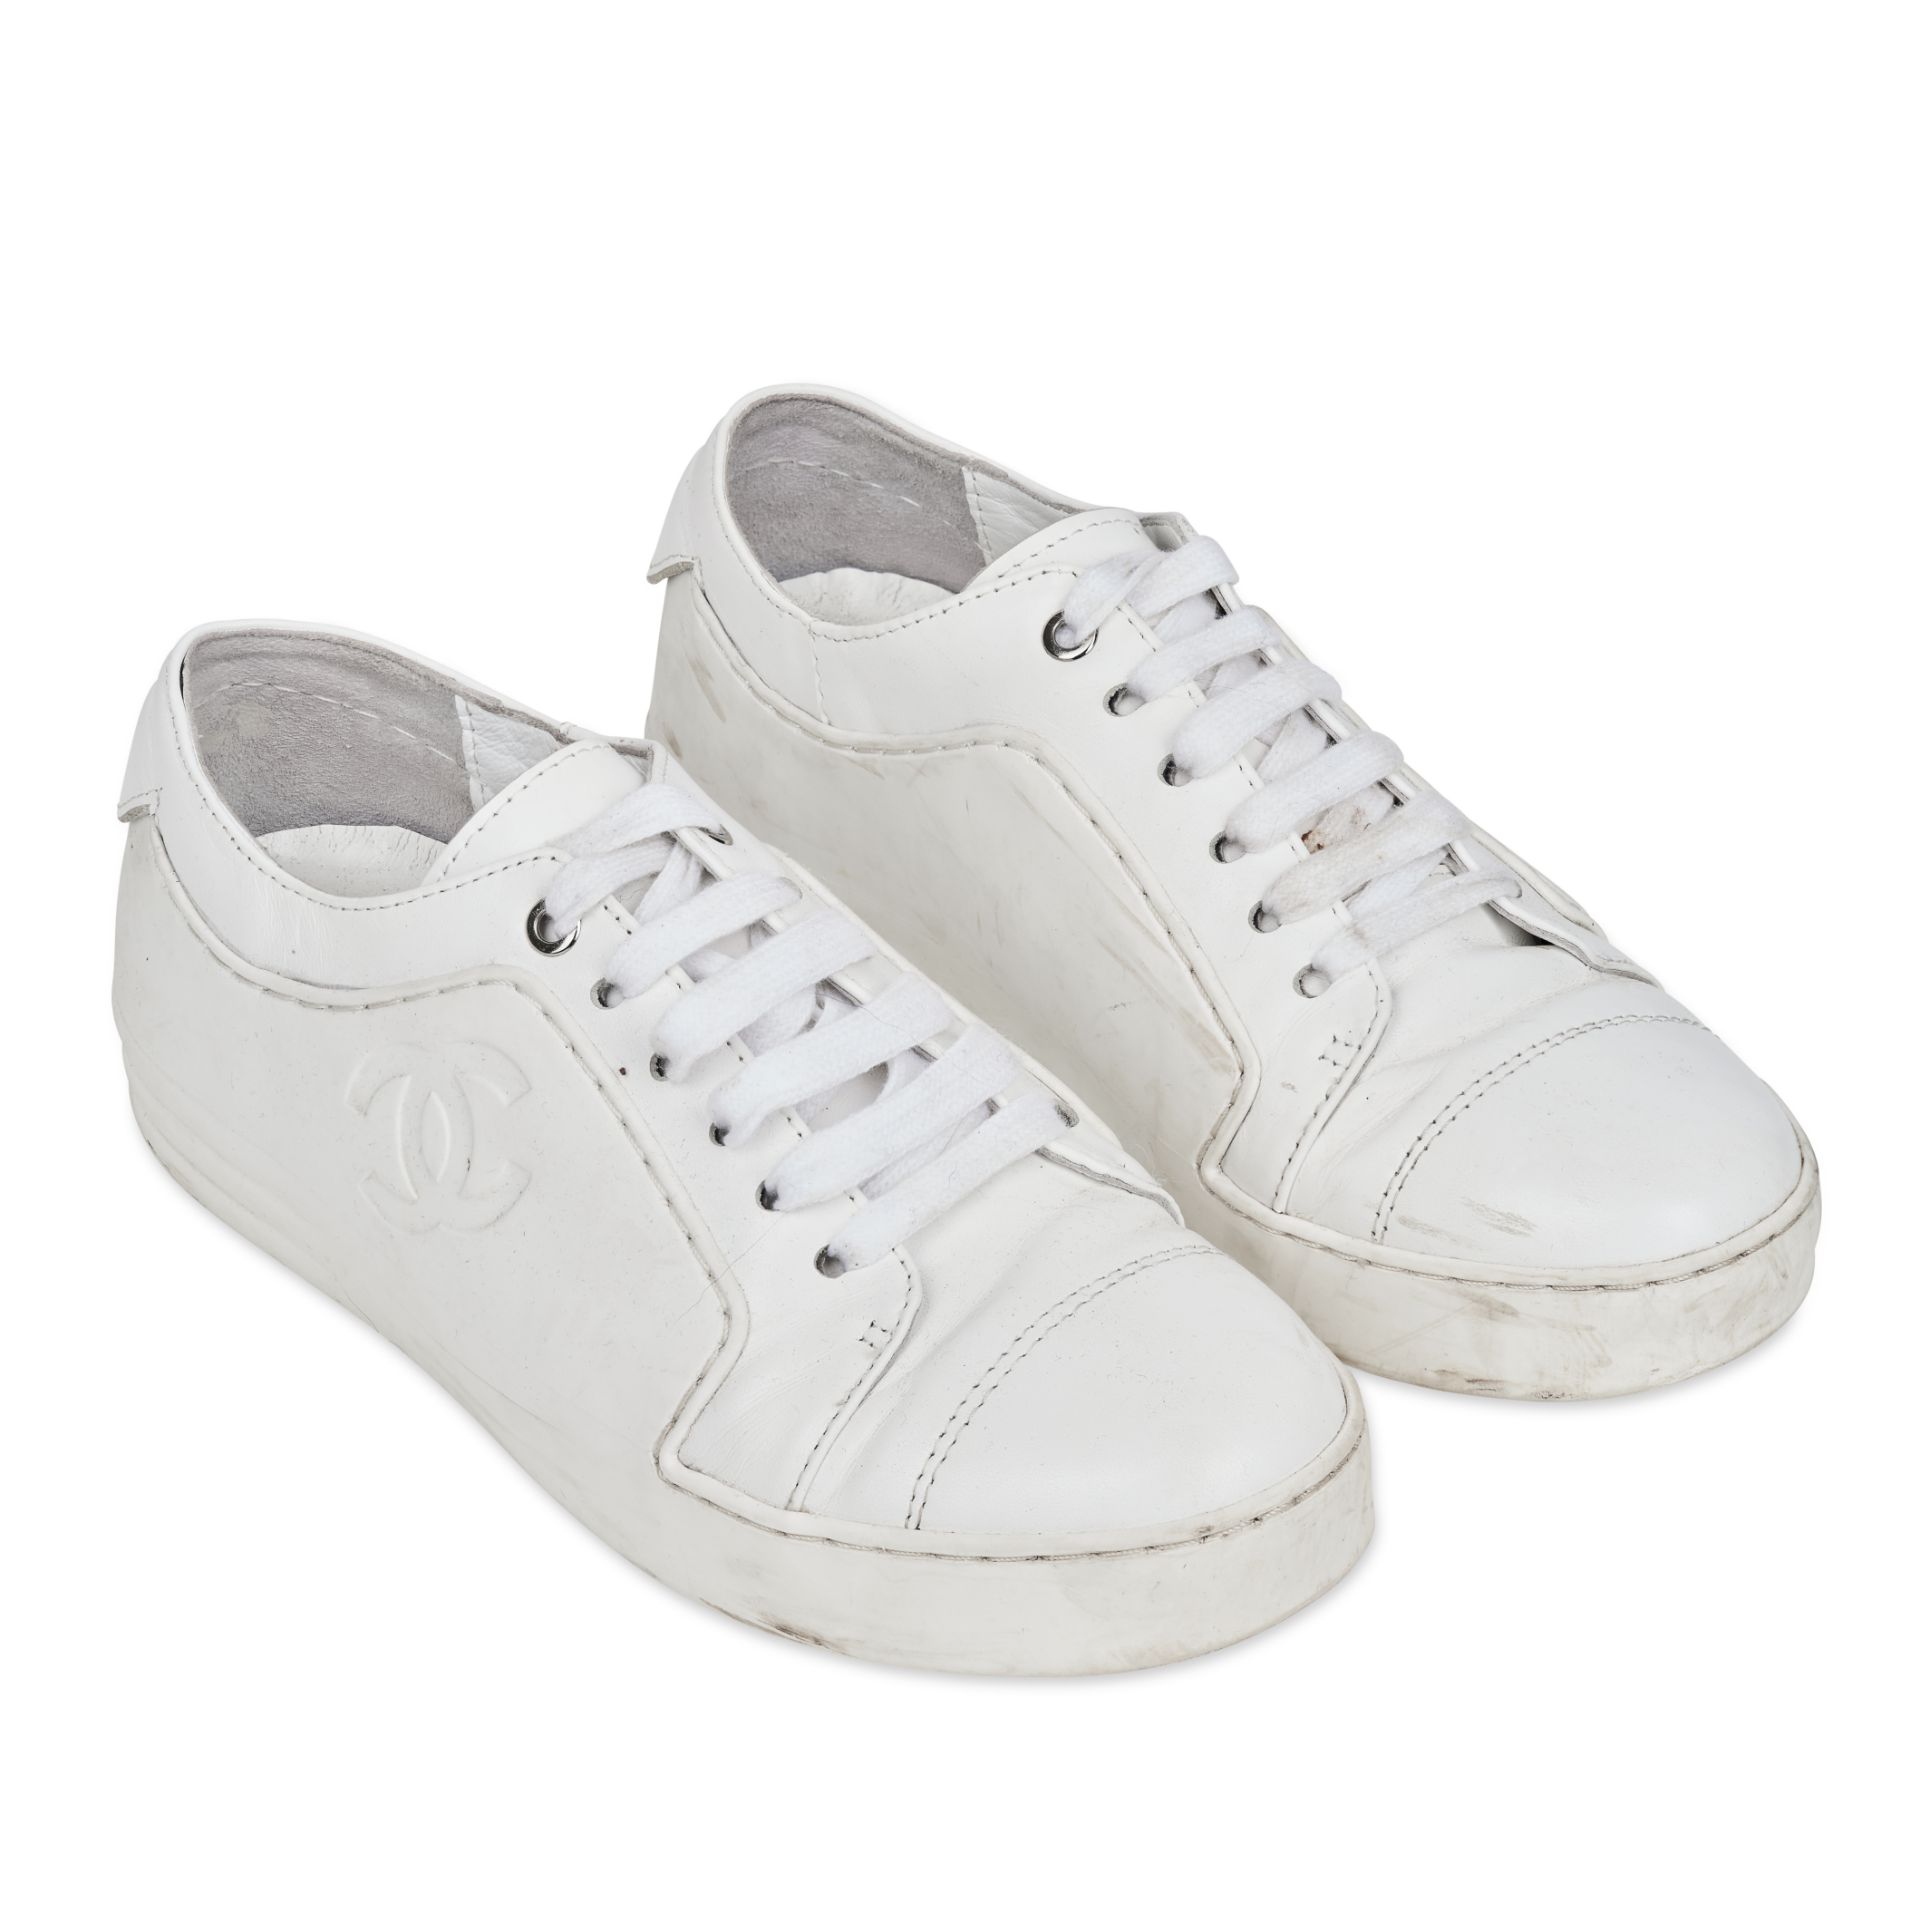 NO RESERVE - CHANEL WHITE CC TRAINERS Condition grade C.  Size 37. White leather trainers with ...